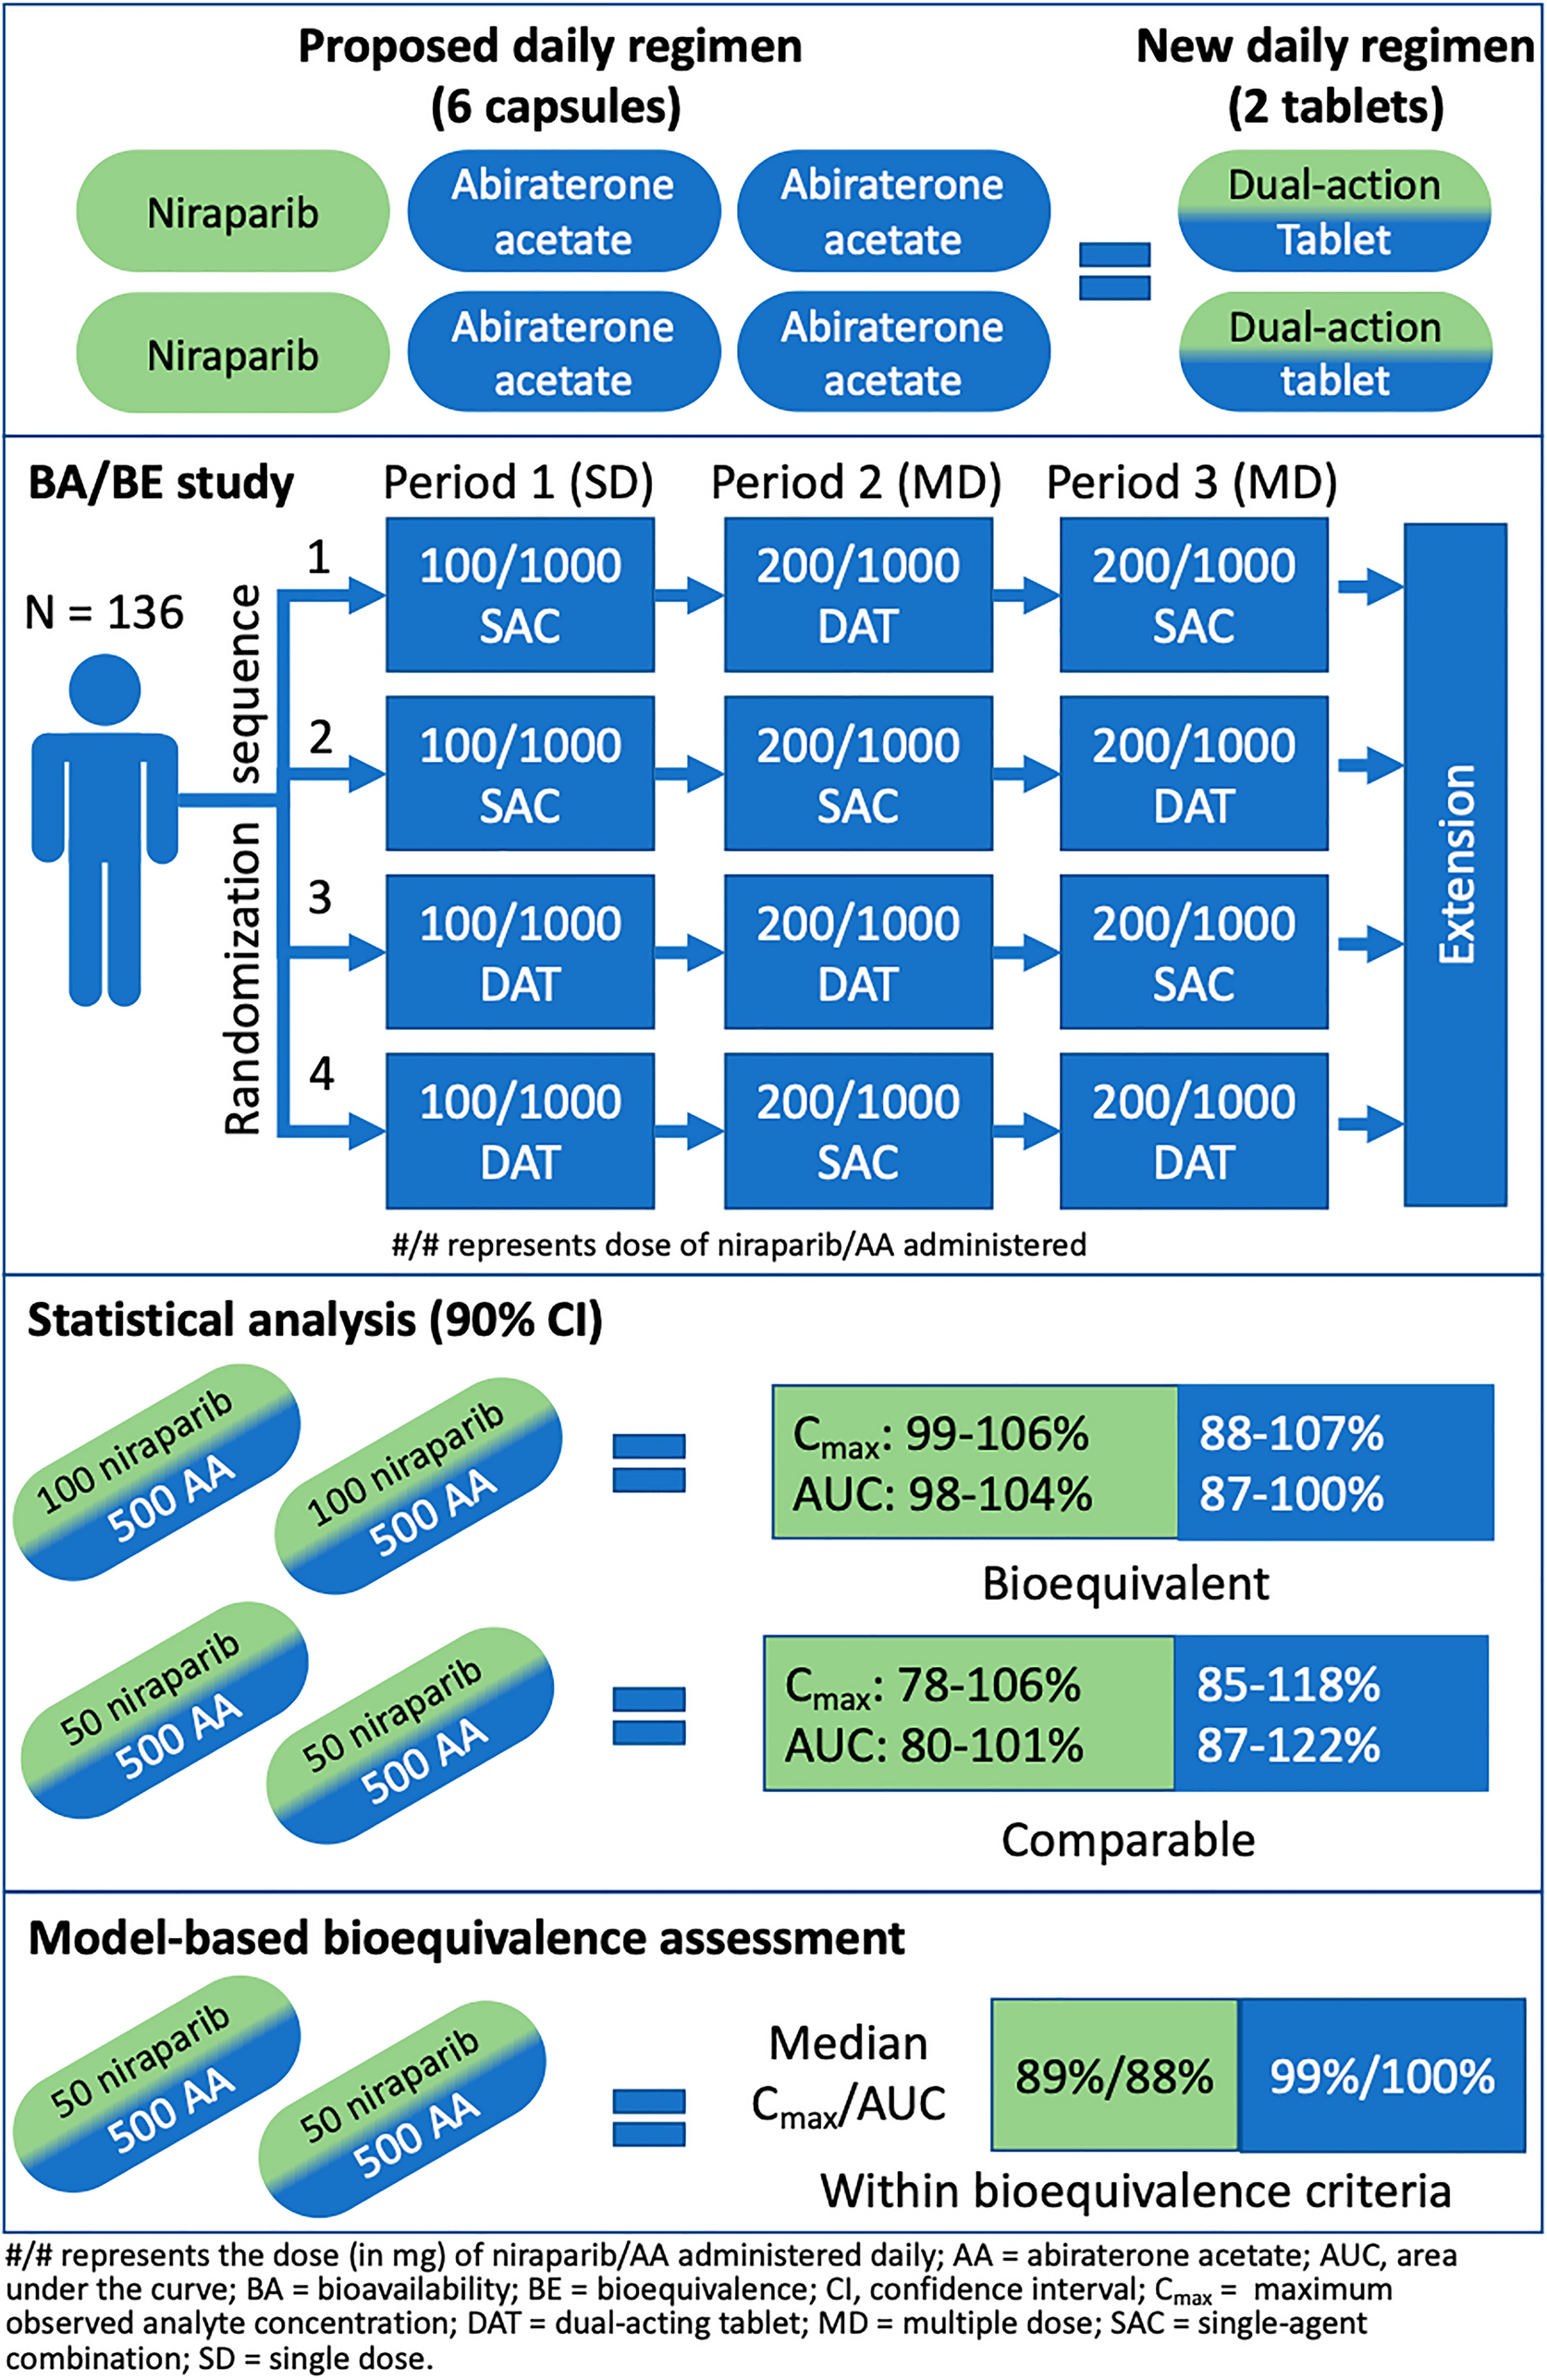 Demonstrating Bioequivalence for Two Dose Strengths of Niraparib and Abiraterone Acetate Dual-Action Tablets Versus Single Agents: Utility of Clinical Study Data Supplemented with Modeling and Simulation